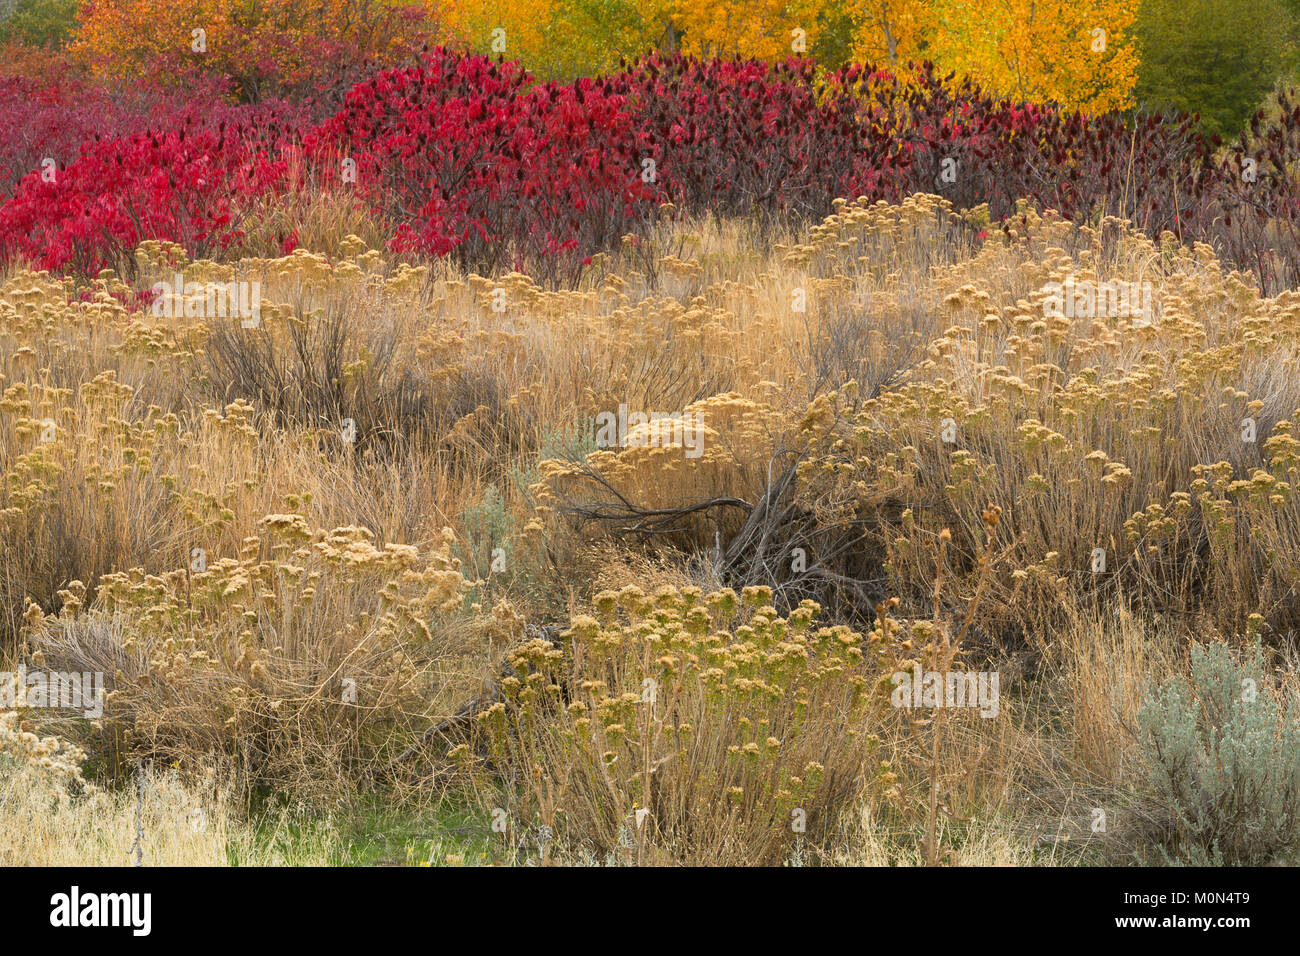 A wild garden of plants along a streambed in the Great Basin Desert of Washington. Rabbitbrush, sage, sumac, and cottonwood make for a colorful fall.  Stock Photo